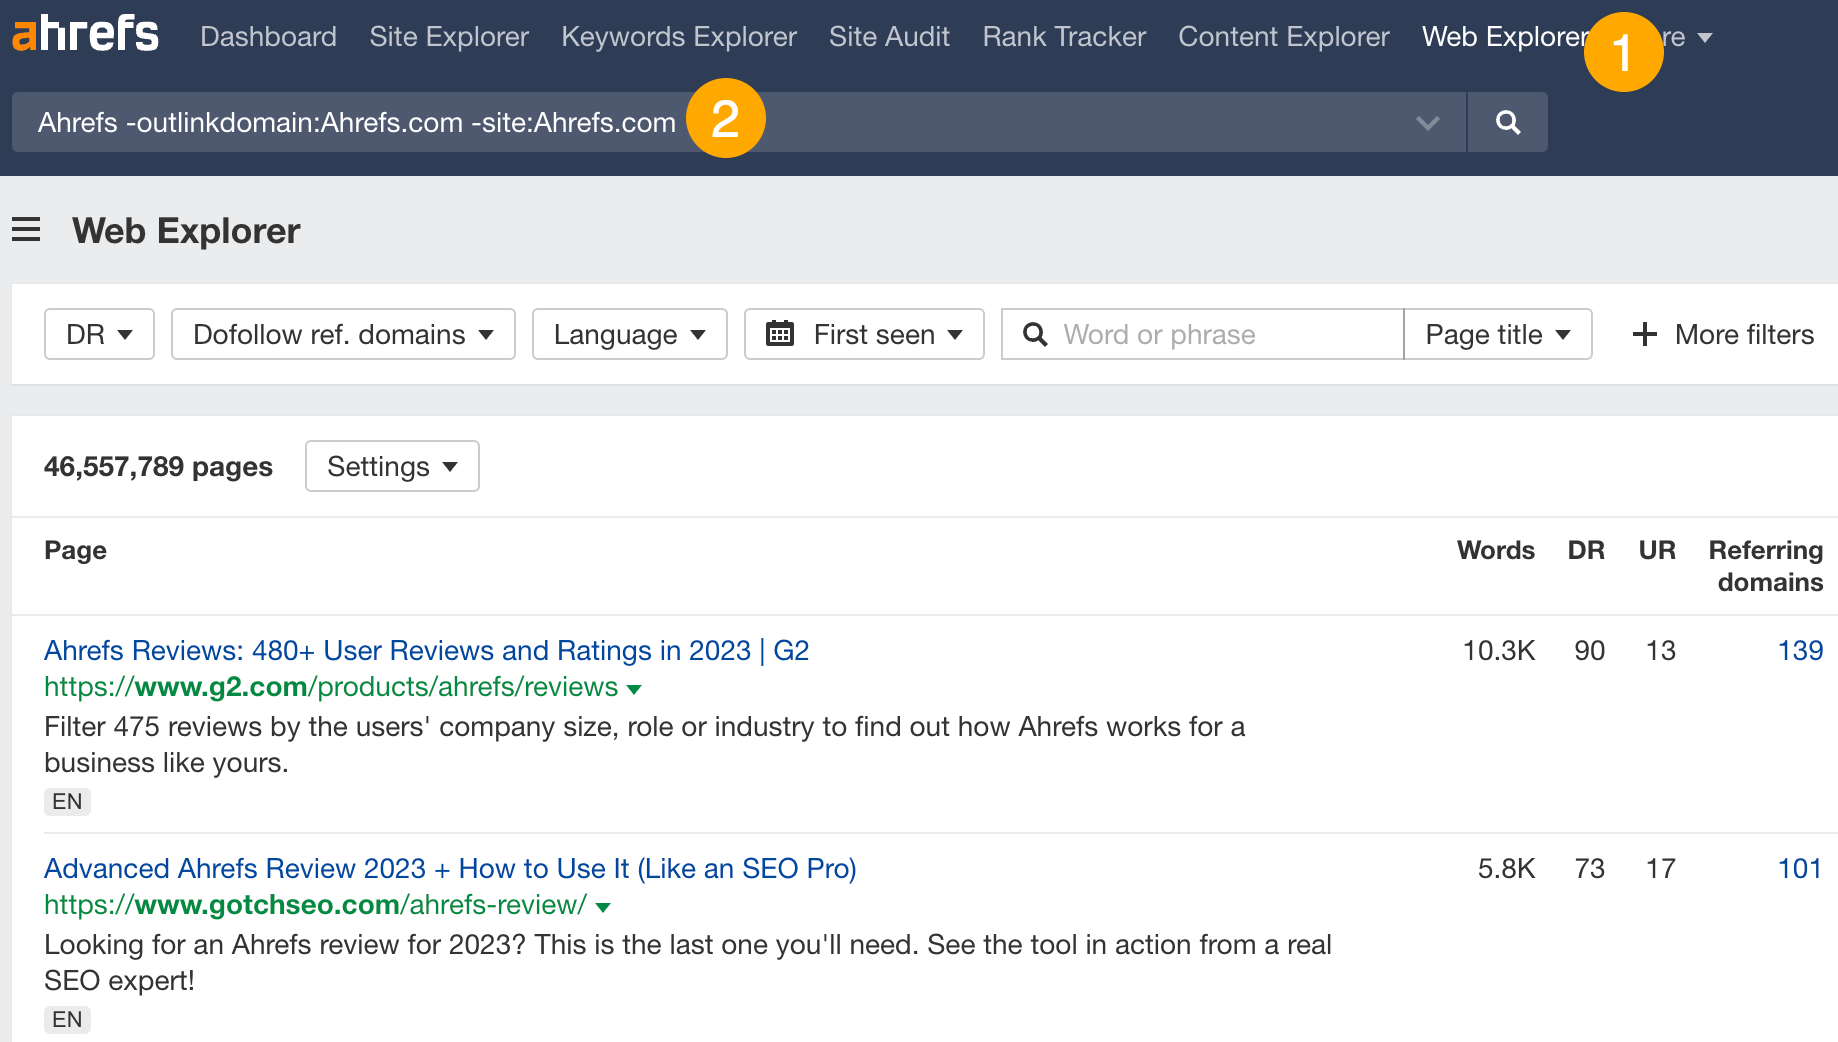 How to find unlinked mentions with Ahrefs' Web Explorer
